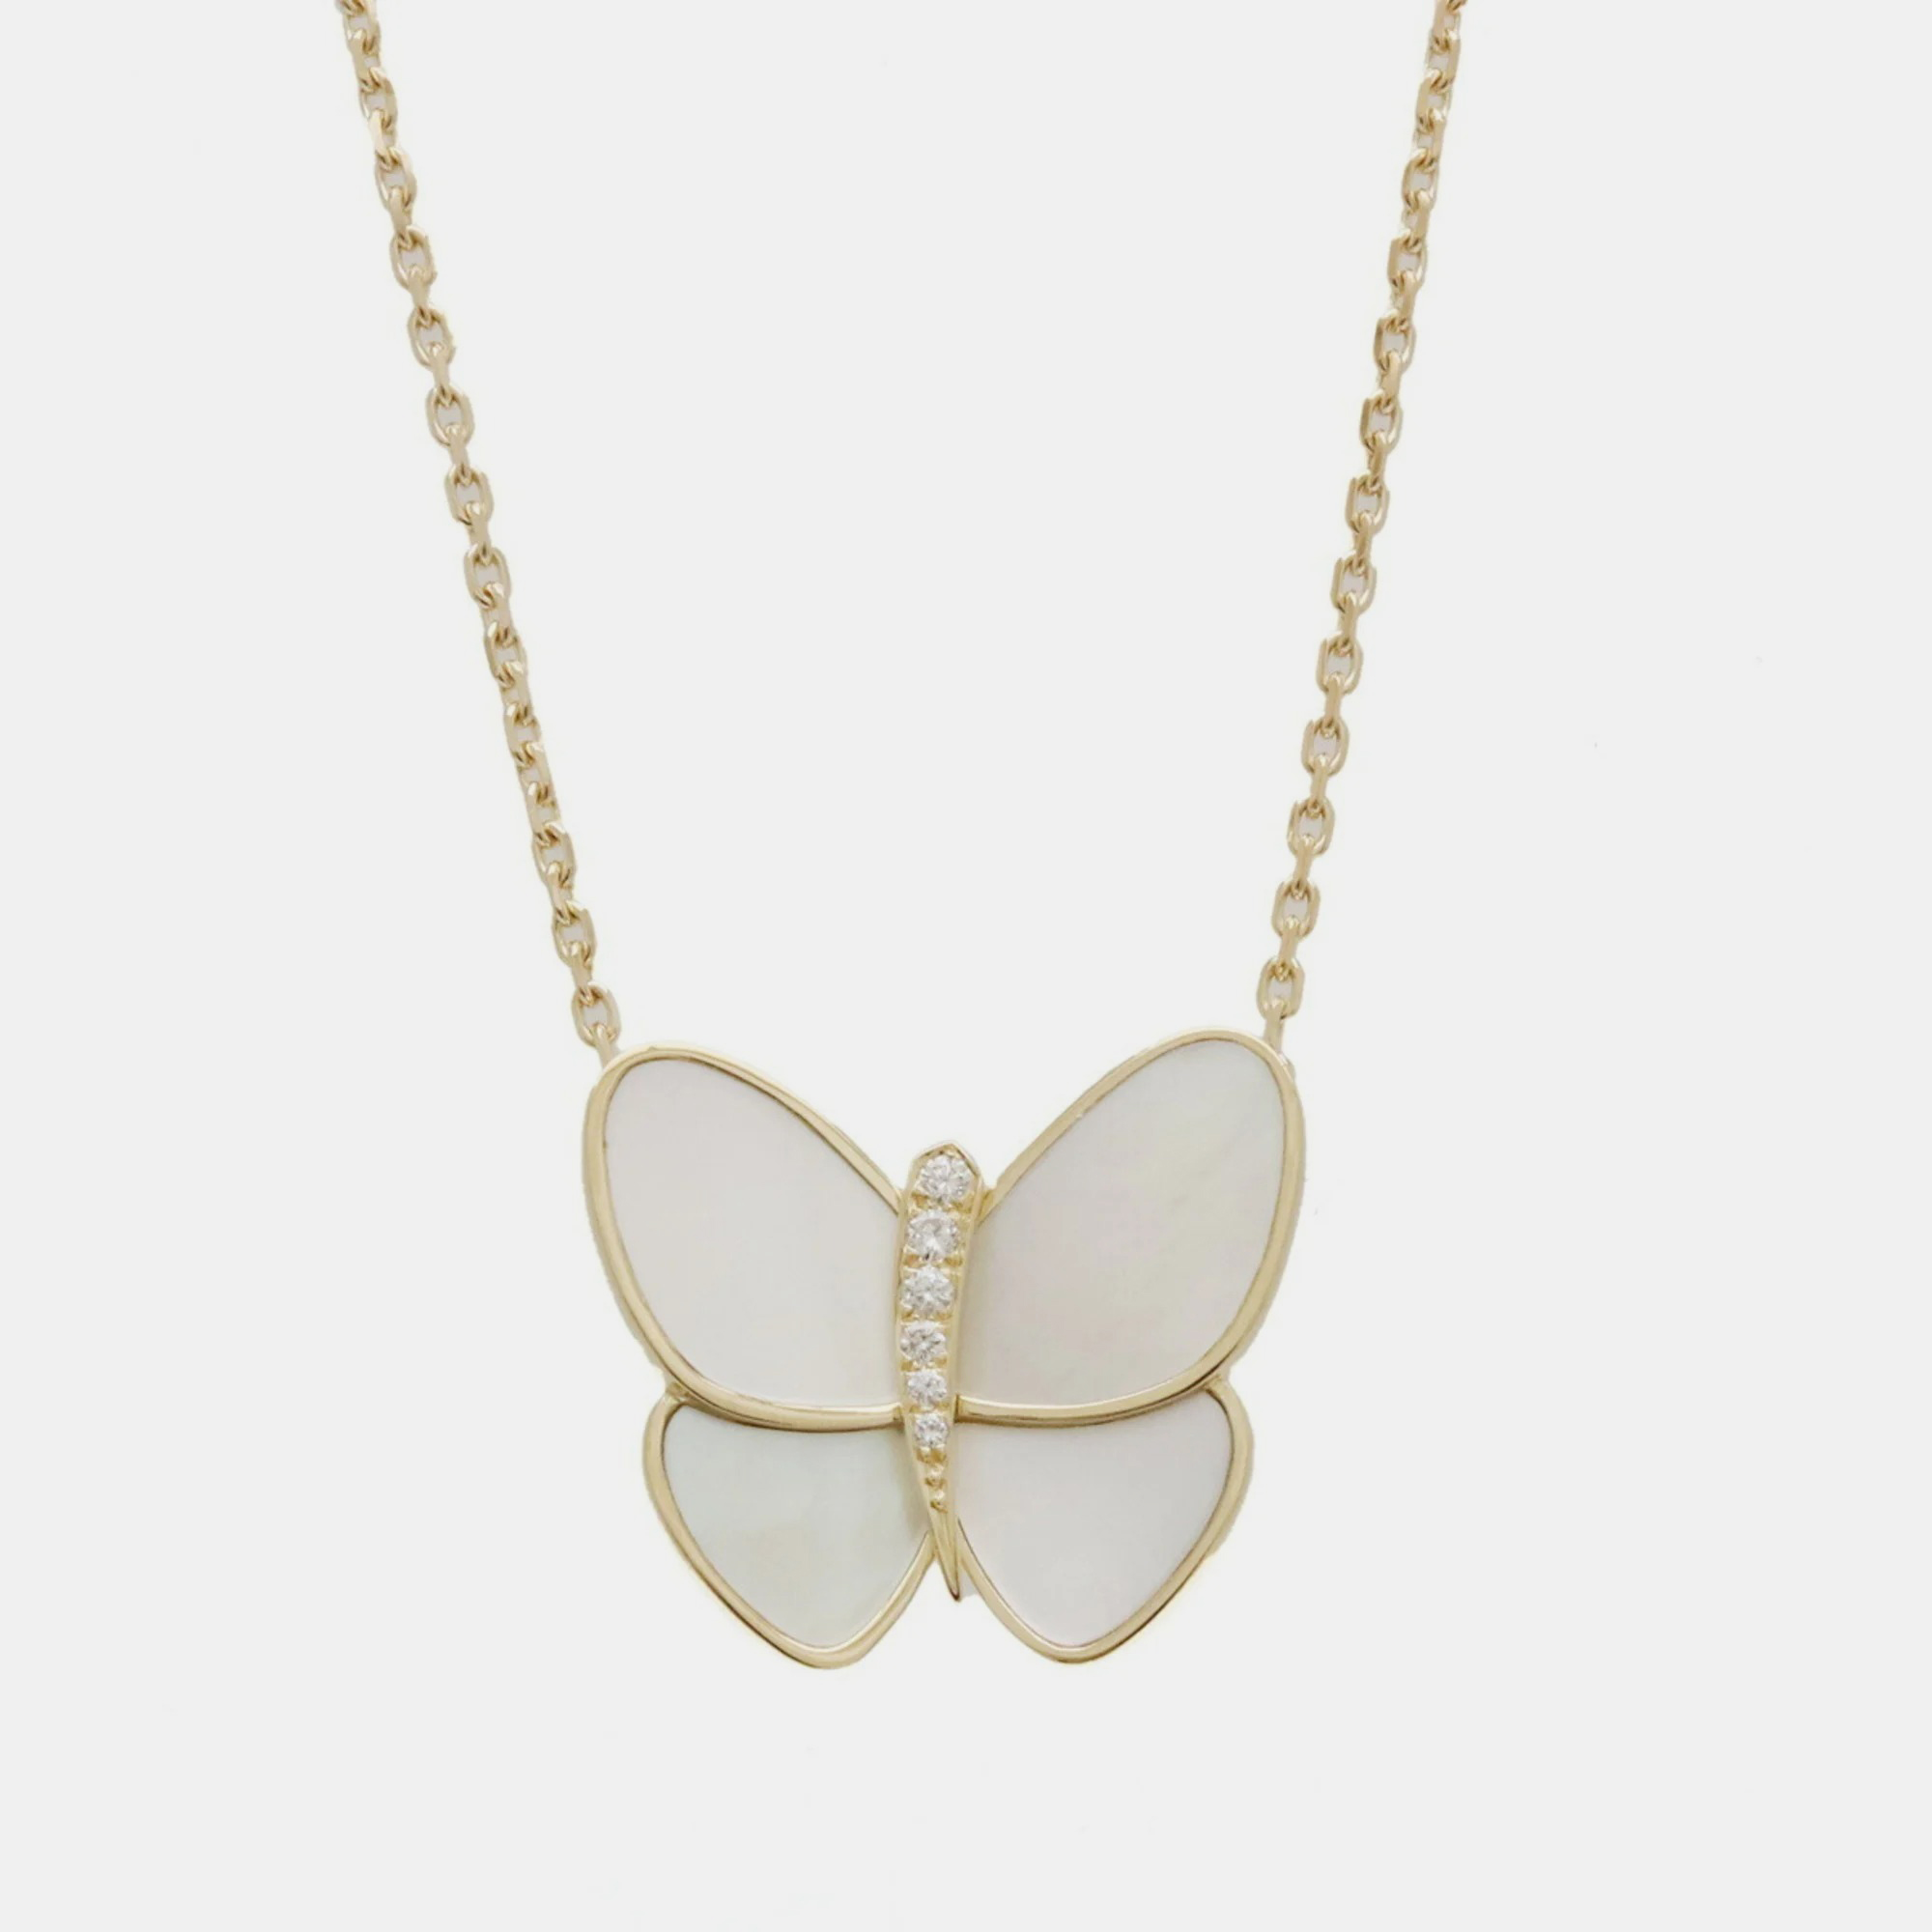 Van cleef & arpels 18k yellow gold, mother of pearl and diamond butterfly pendant necklace